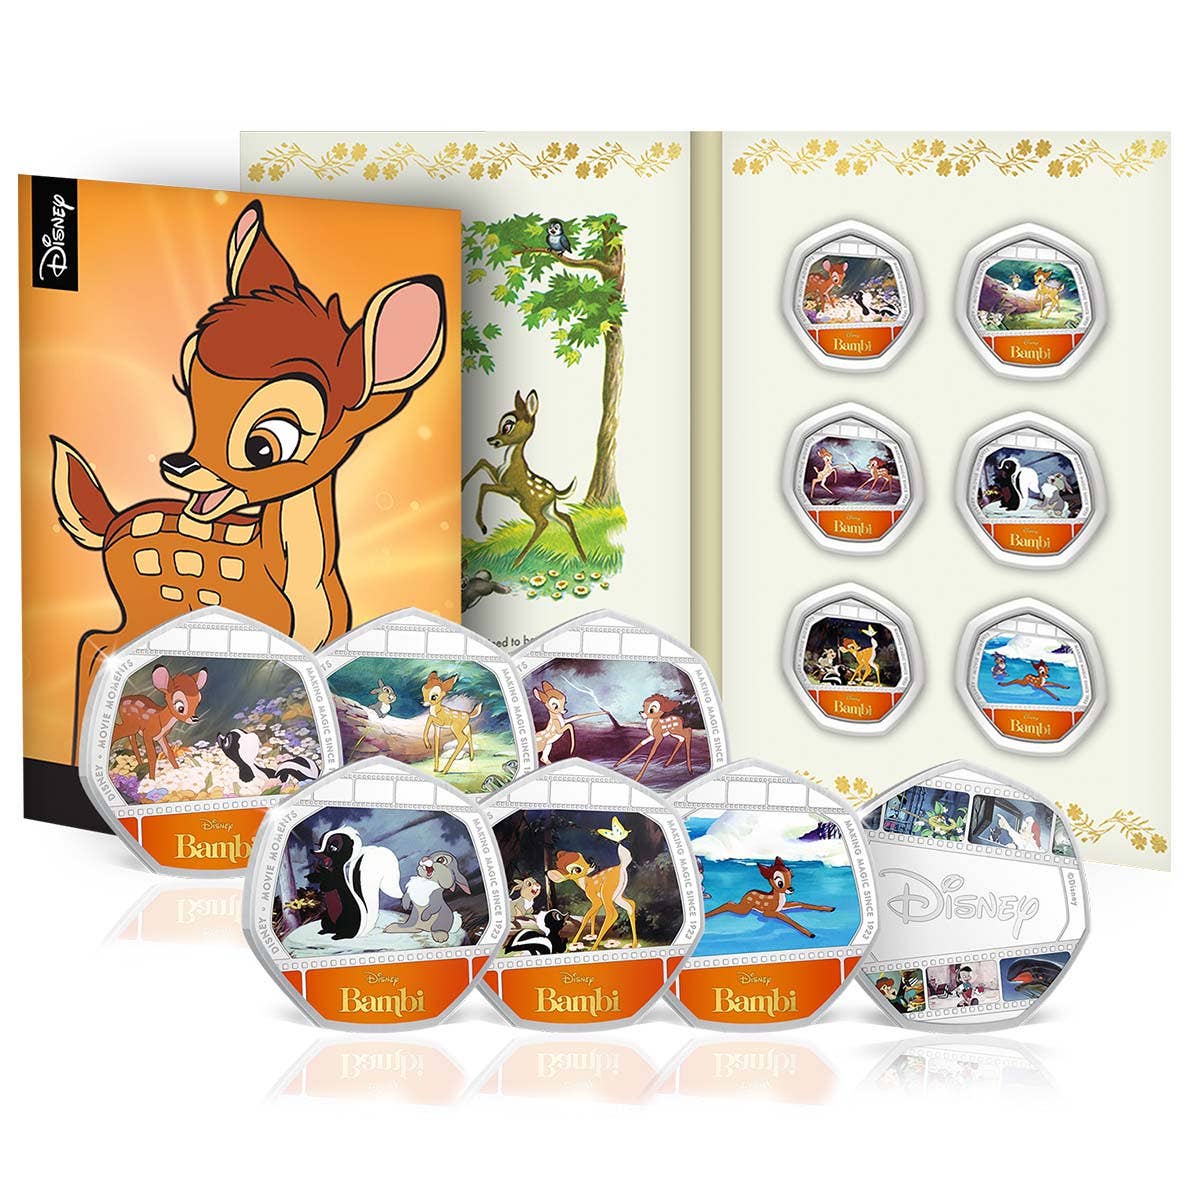 The Disney Movie Moments Complete Set - Bambi